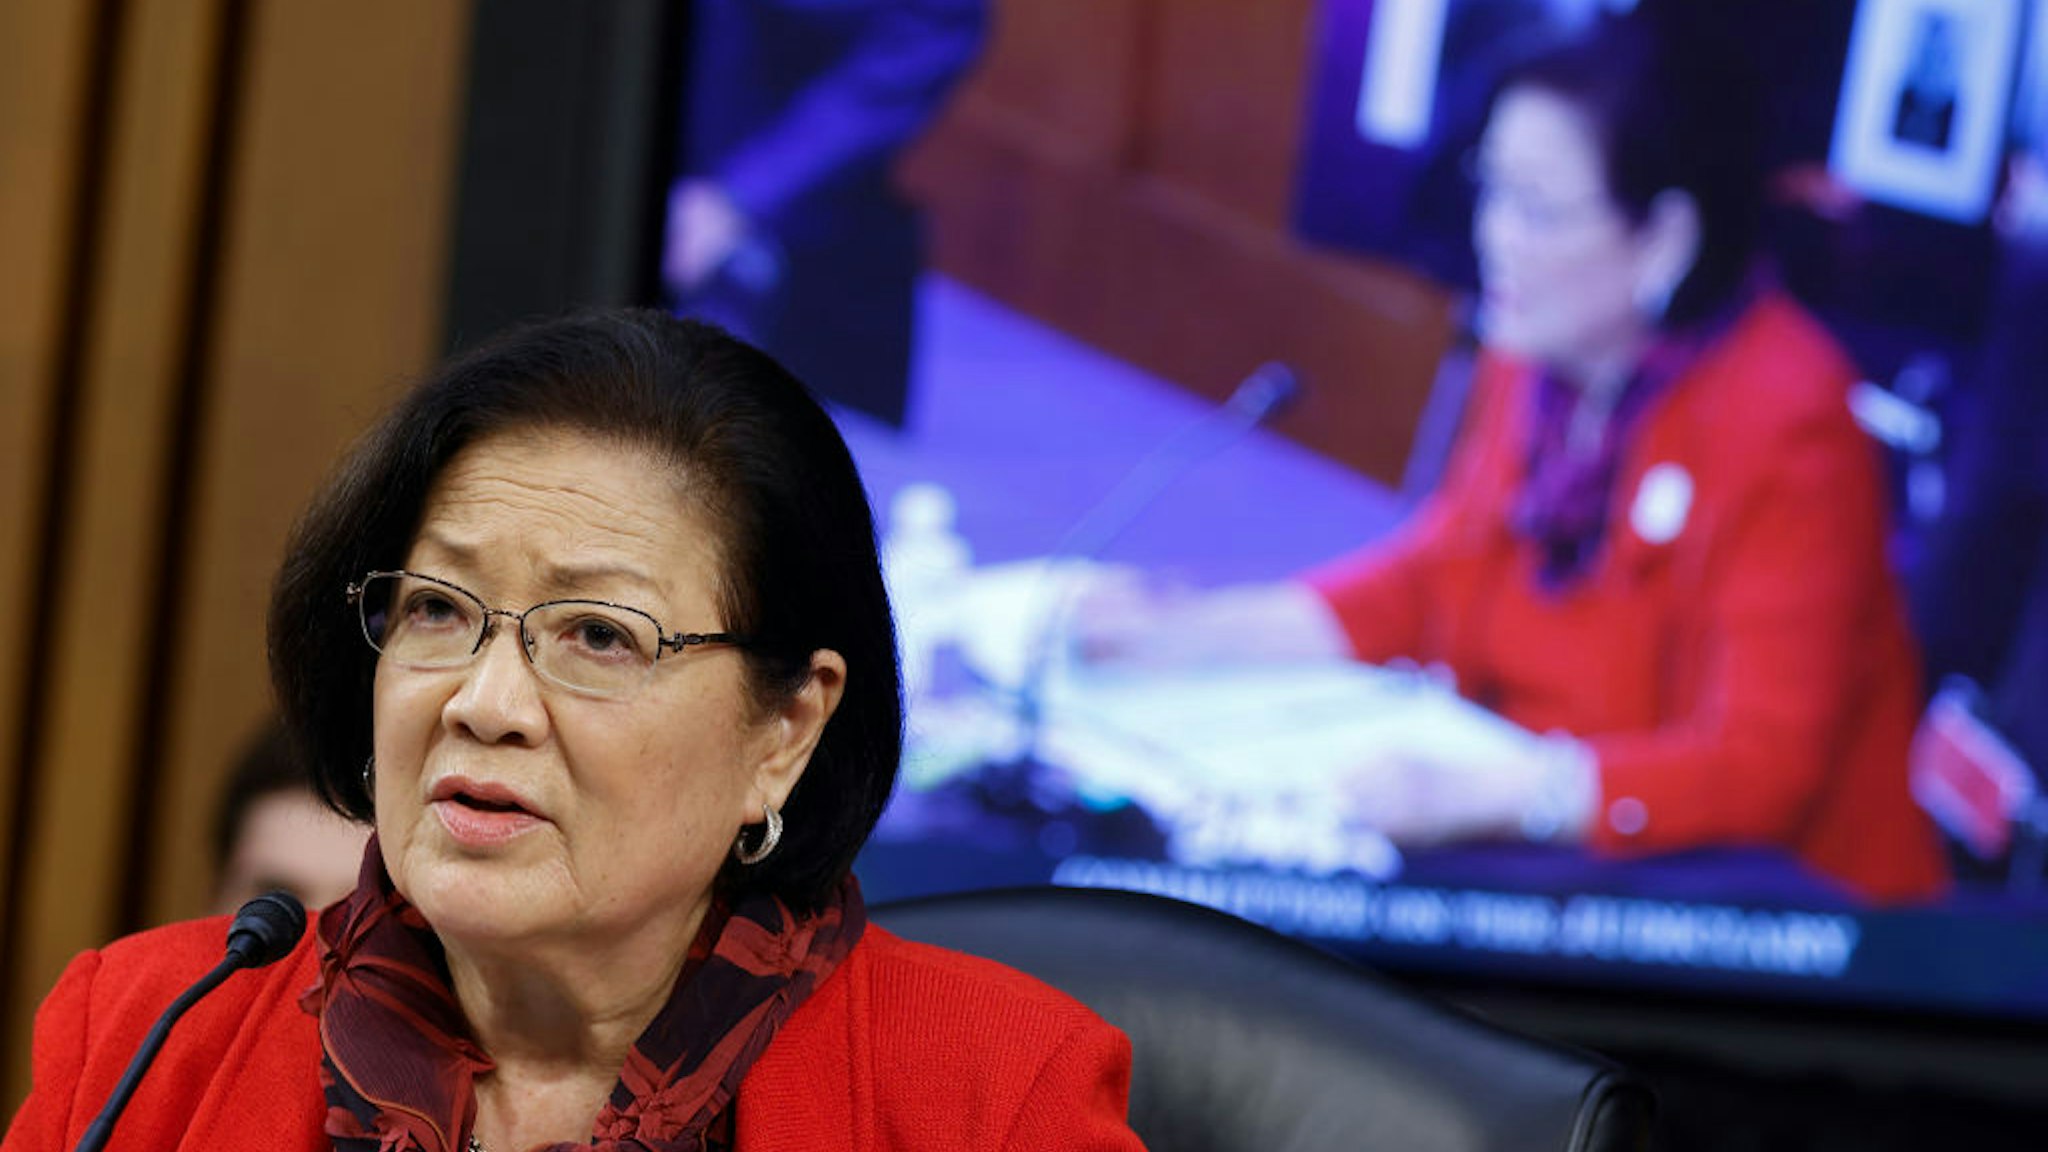 WASHINGTON, DC - OCTOBER 13: Senator Mazie Hirono (D-HI), speaks during the Senate Judiciary Committee confirmation hearing for Supreme Court nominee Judge Amy Coney Barrett on Capitol Hill on October 13, 2020 in Washington, DC. Barrett was nominated by President Donald Trump to fill the vacancy left by Justice Ruth Bader Ginsburg who passed away in September. (Photo by Samuel Corum/Getty Images)